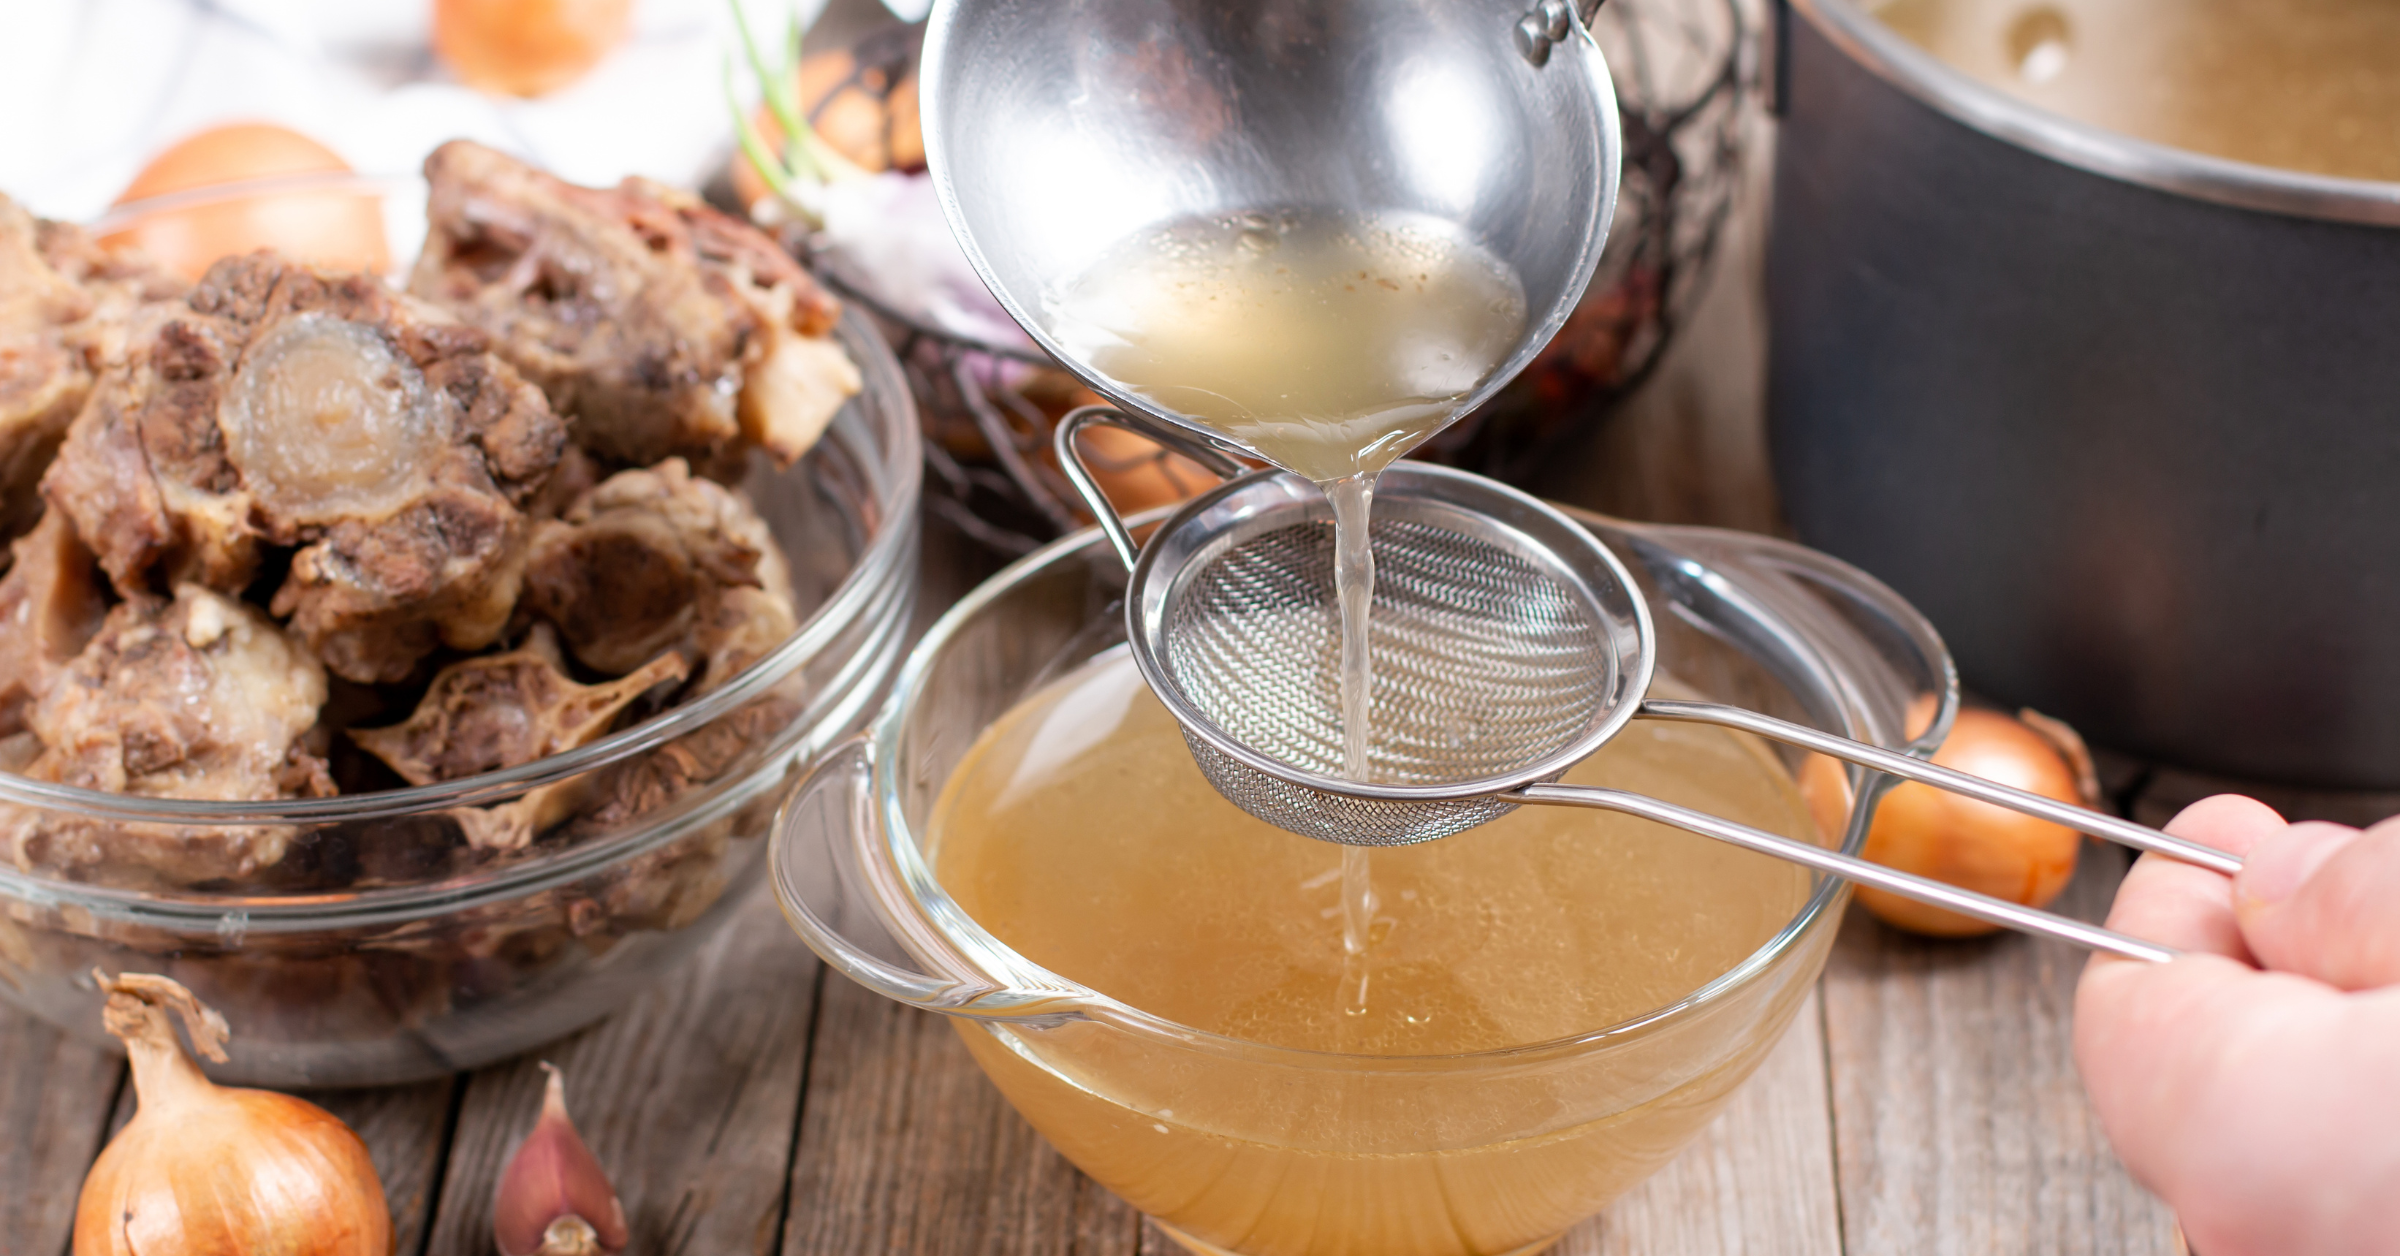 Discover all about bone broth, if it.'s for you and healthy alternatives (plant-based options)